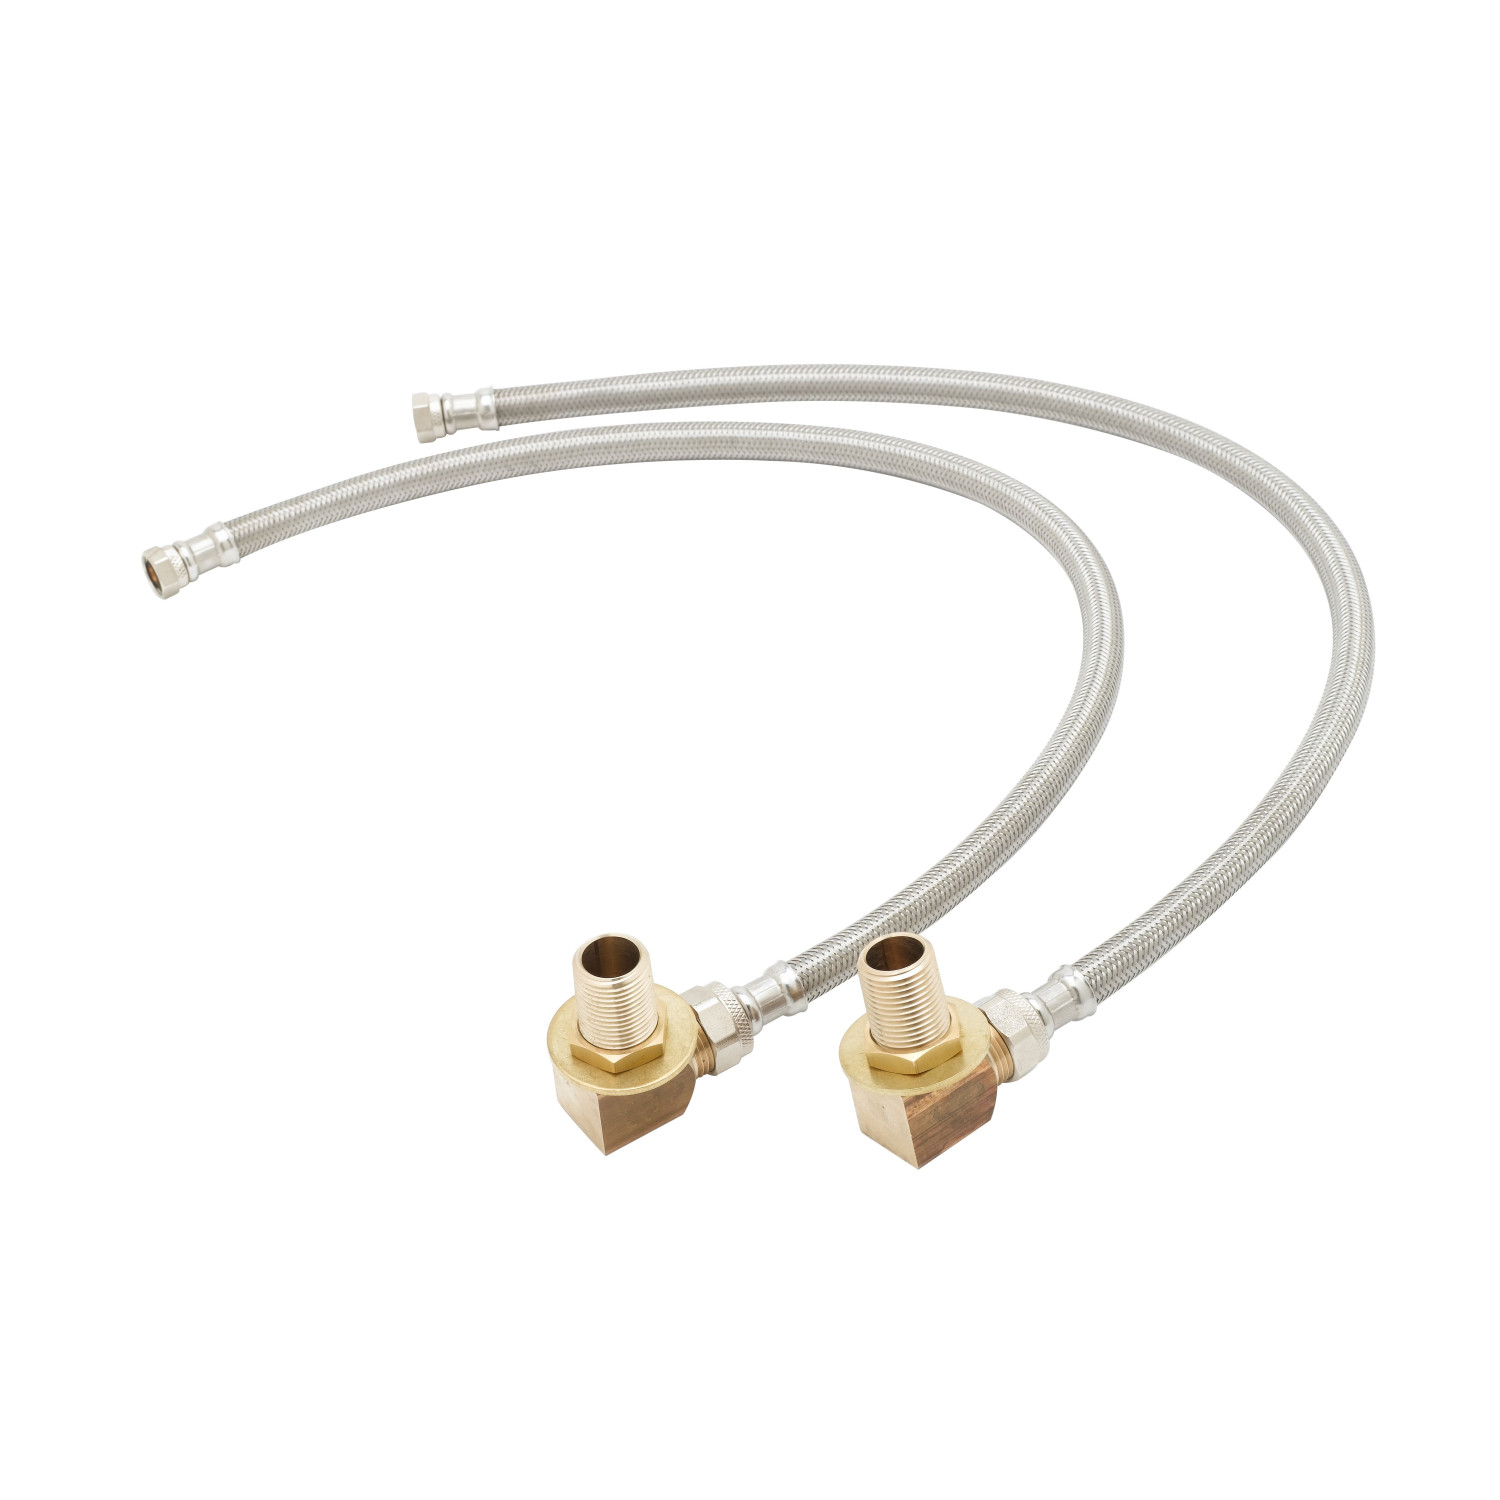 T＆S Brass B-0230-KIT Inlet Kit with 1/2-Inch Npt Nipple, Close Elbows and  24-Inch Flex Supply Hoses by T＆S Brass